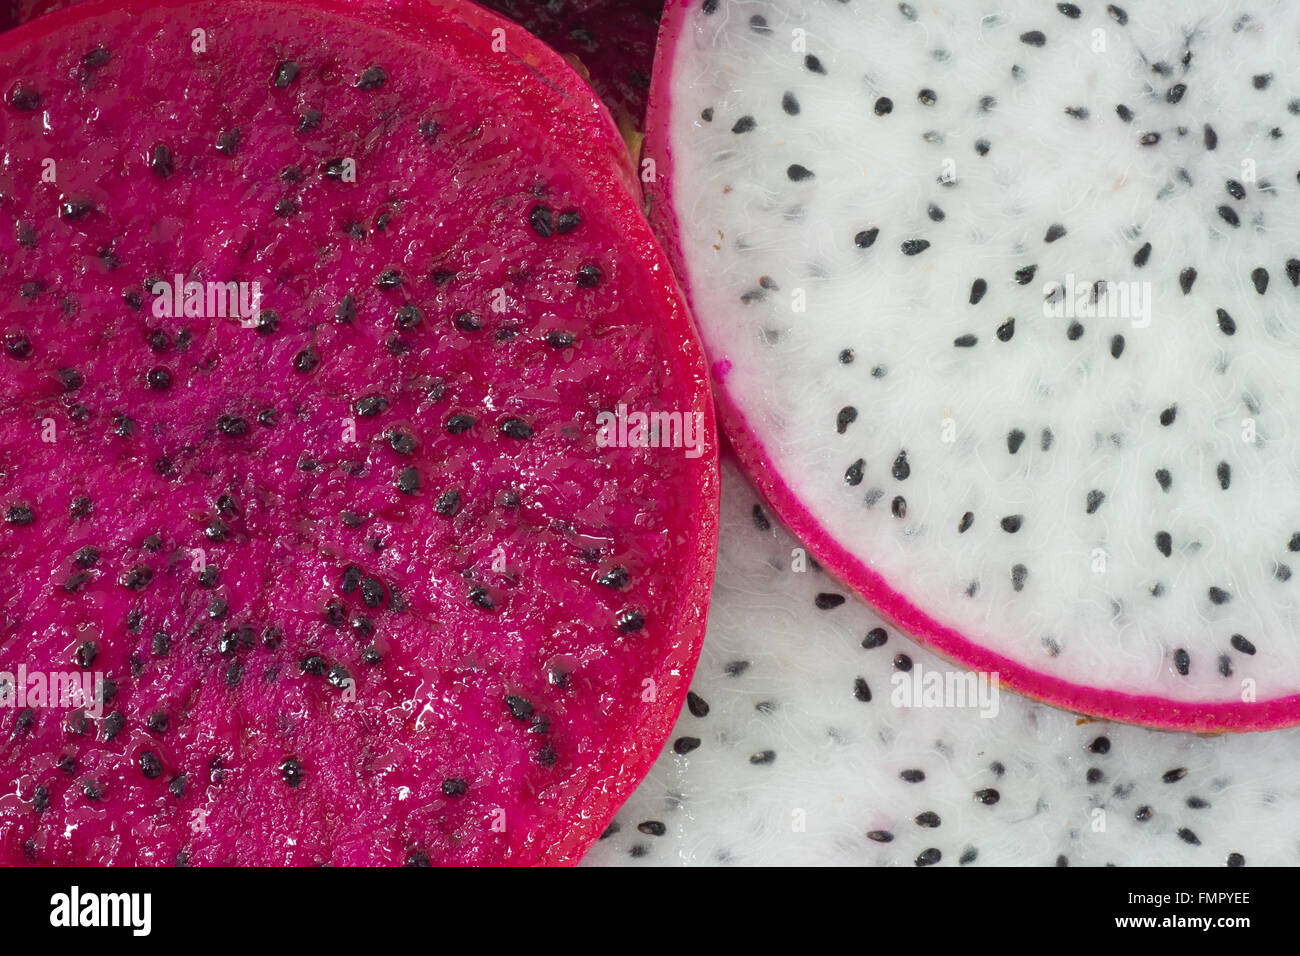 sliced red dragon fruit as background Stock Photo